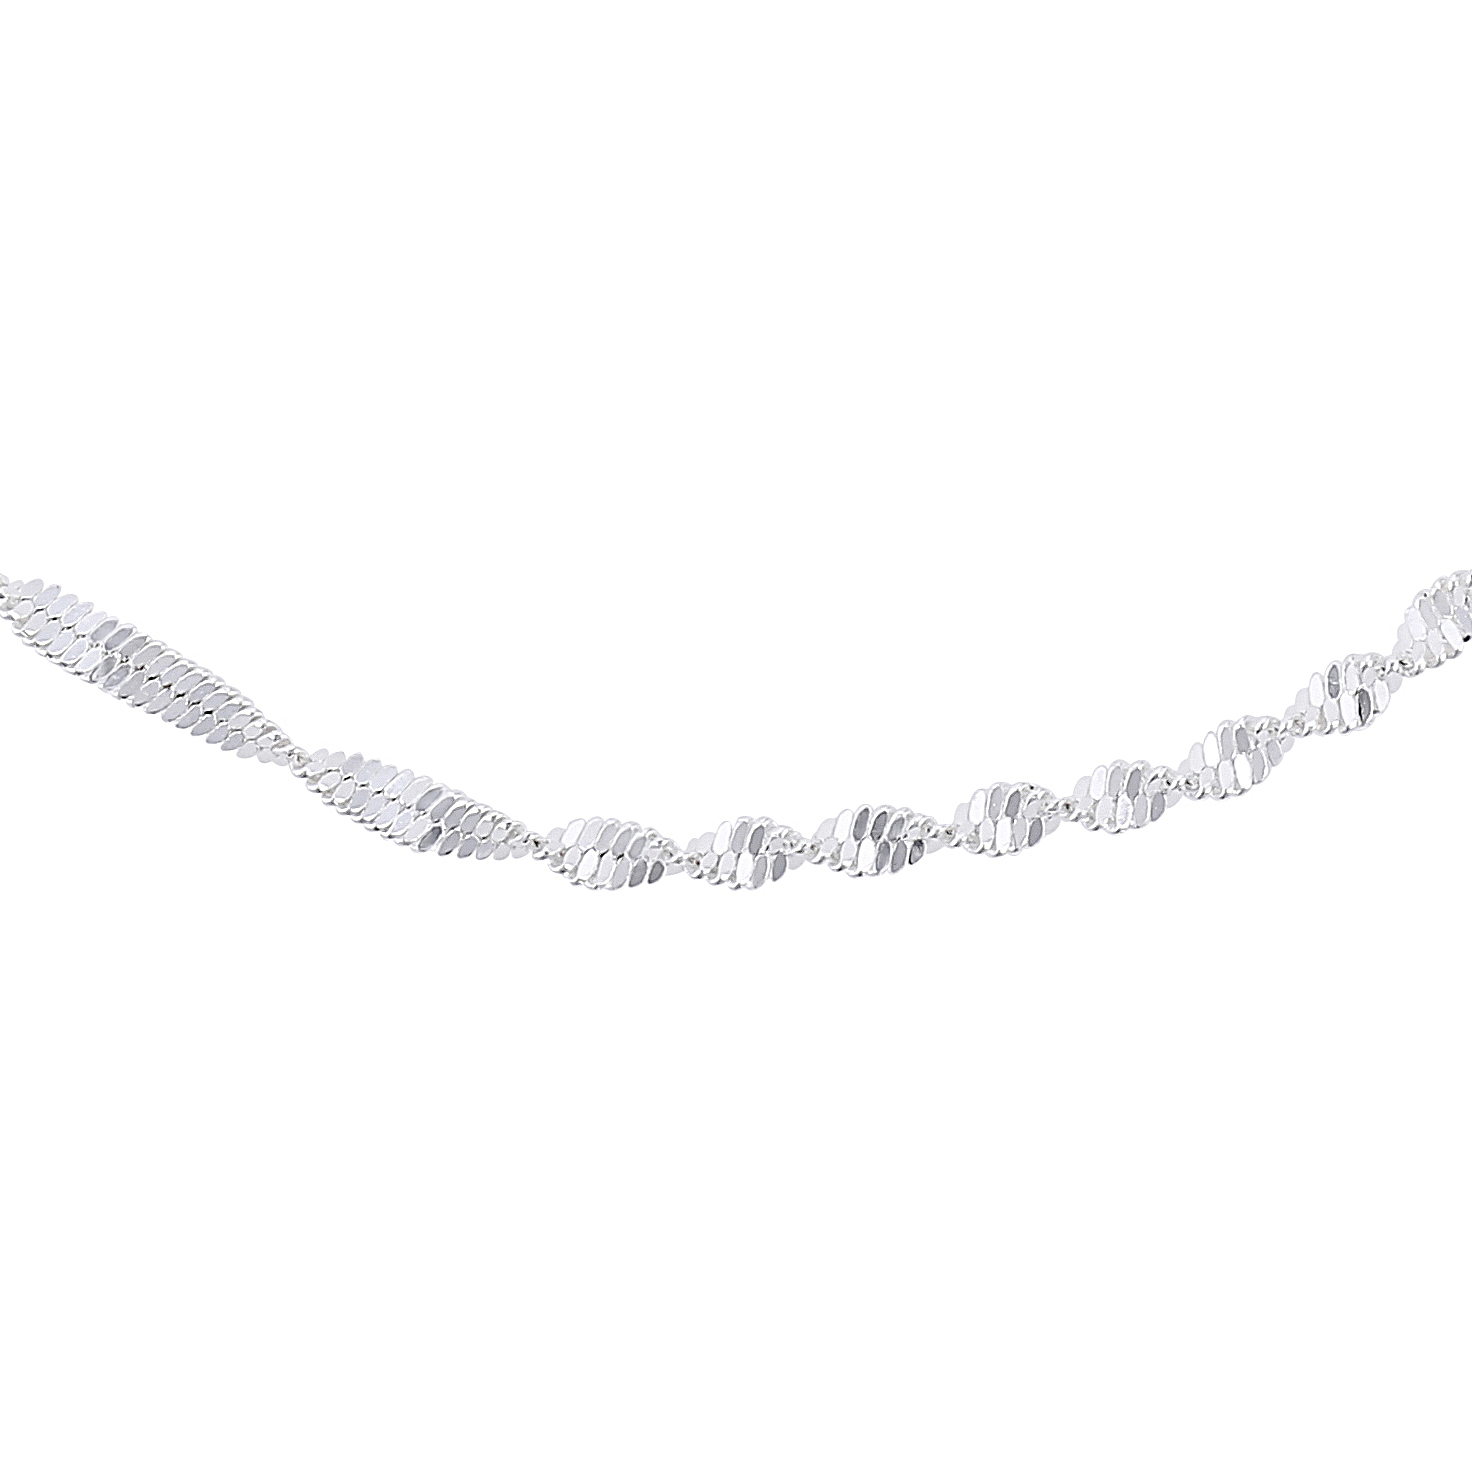 Necklace - Silver Twirl